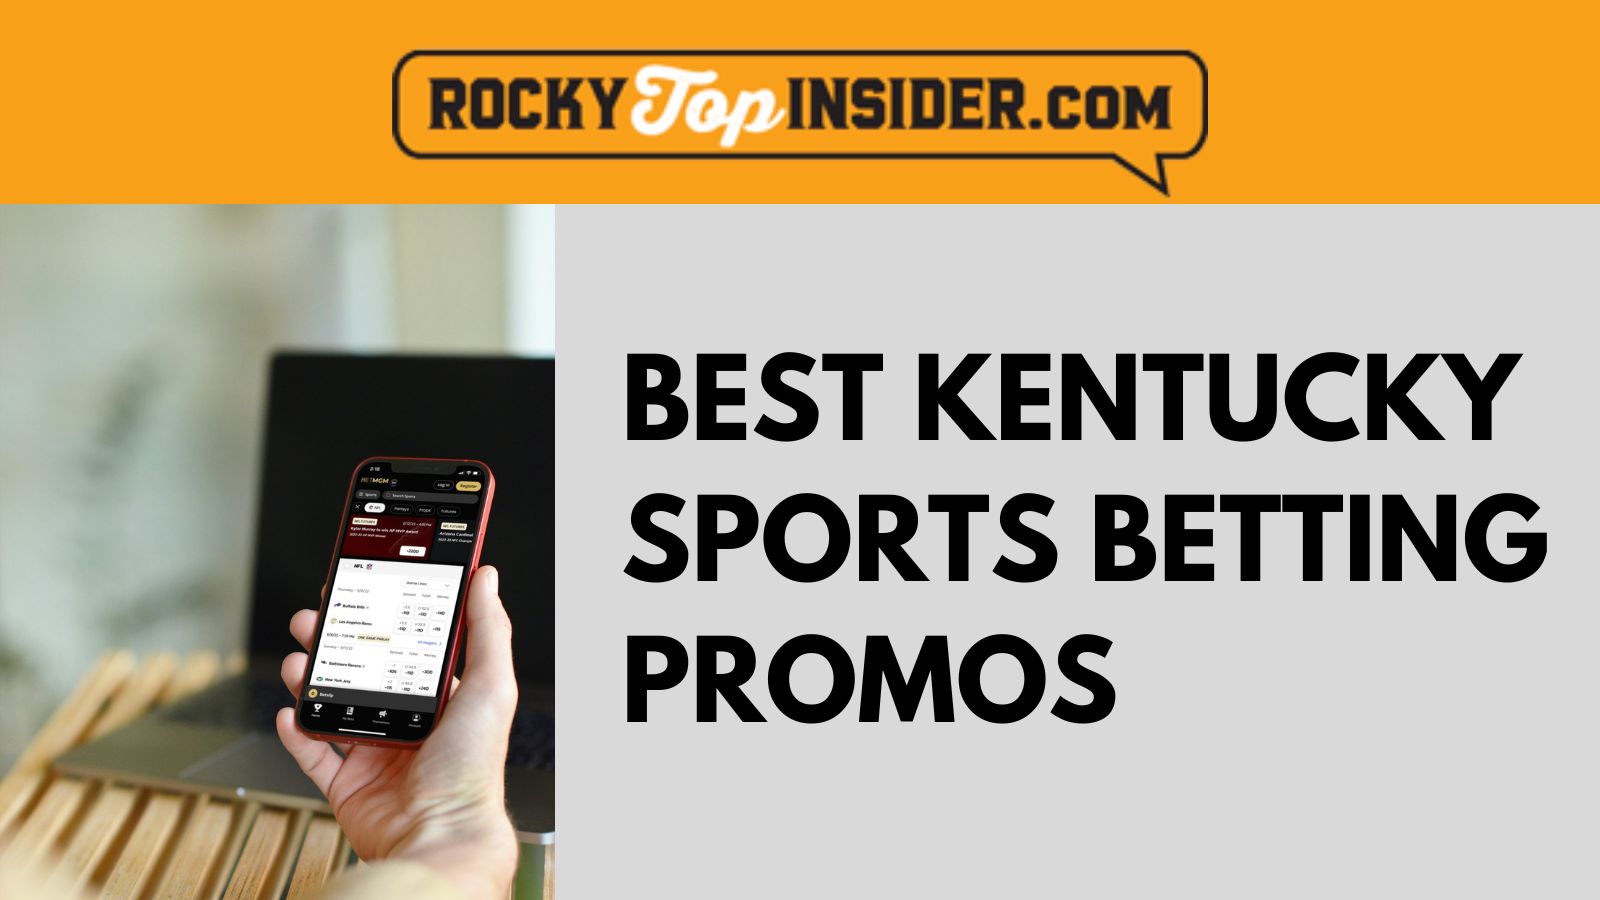 NFL Betting Apps, Promos, Bonuses, and Welcome Offers